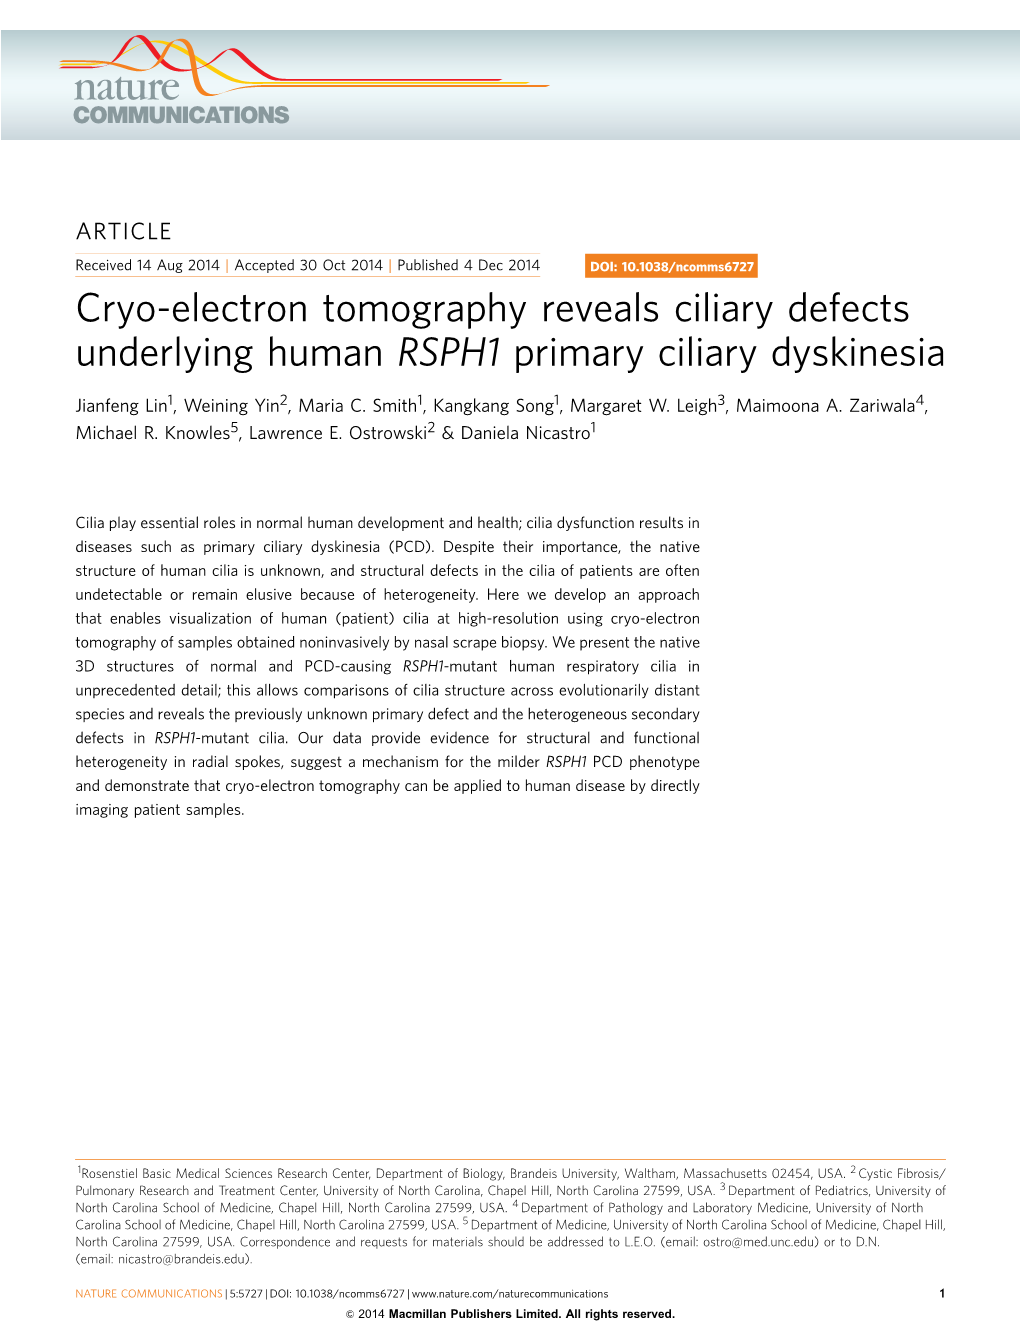 Cryo-Electron Tomography Reveals Ciliary Defects Underlying Human RSPH1 Primary Ciliary Dyskinesia